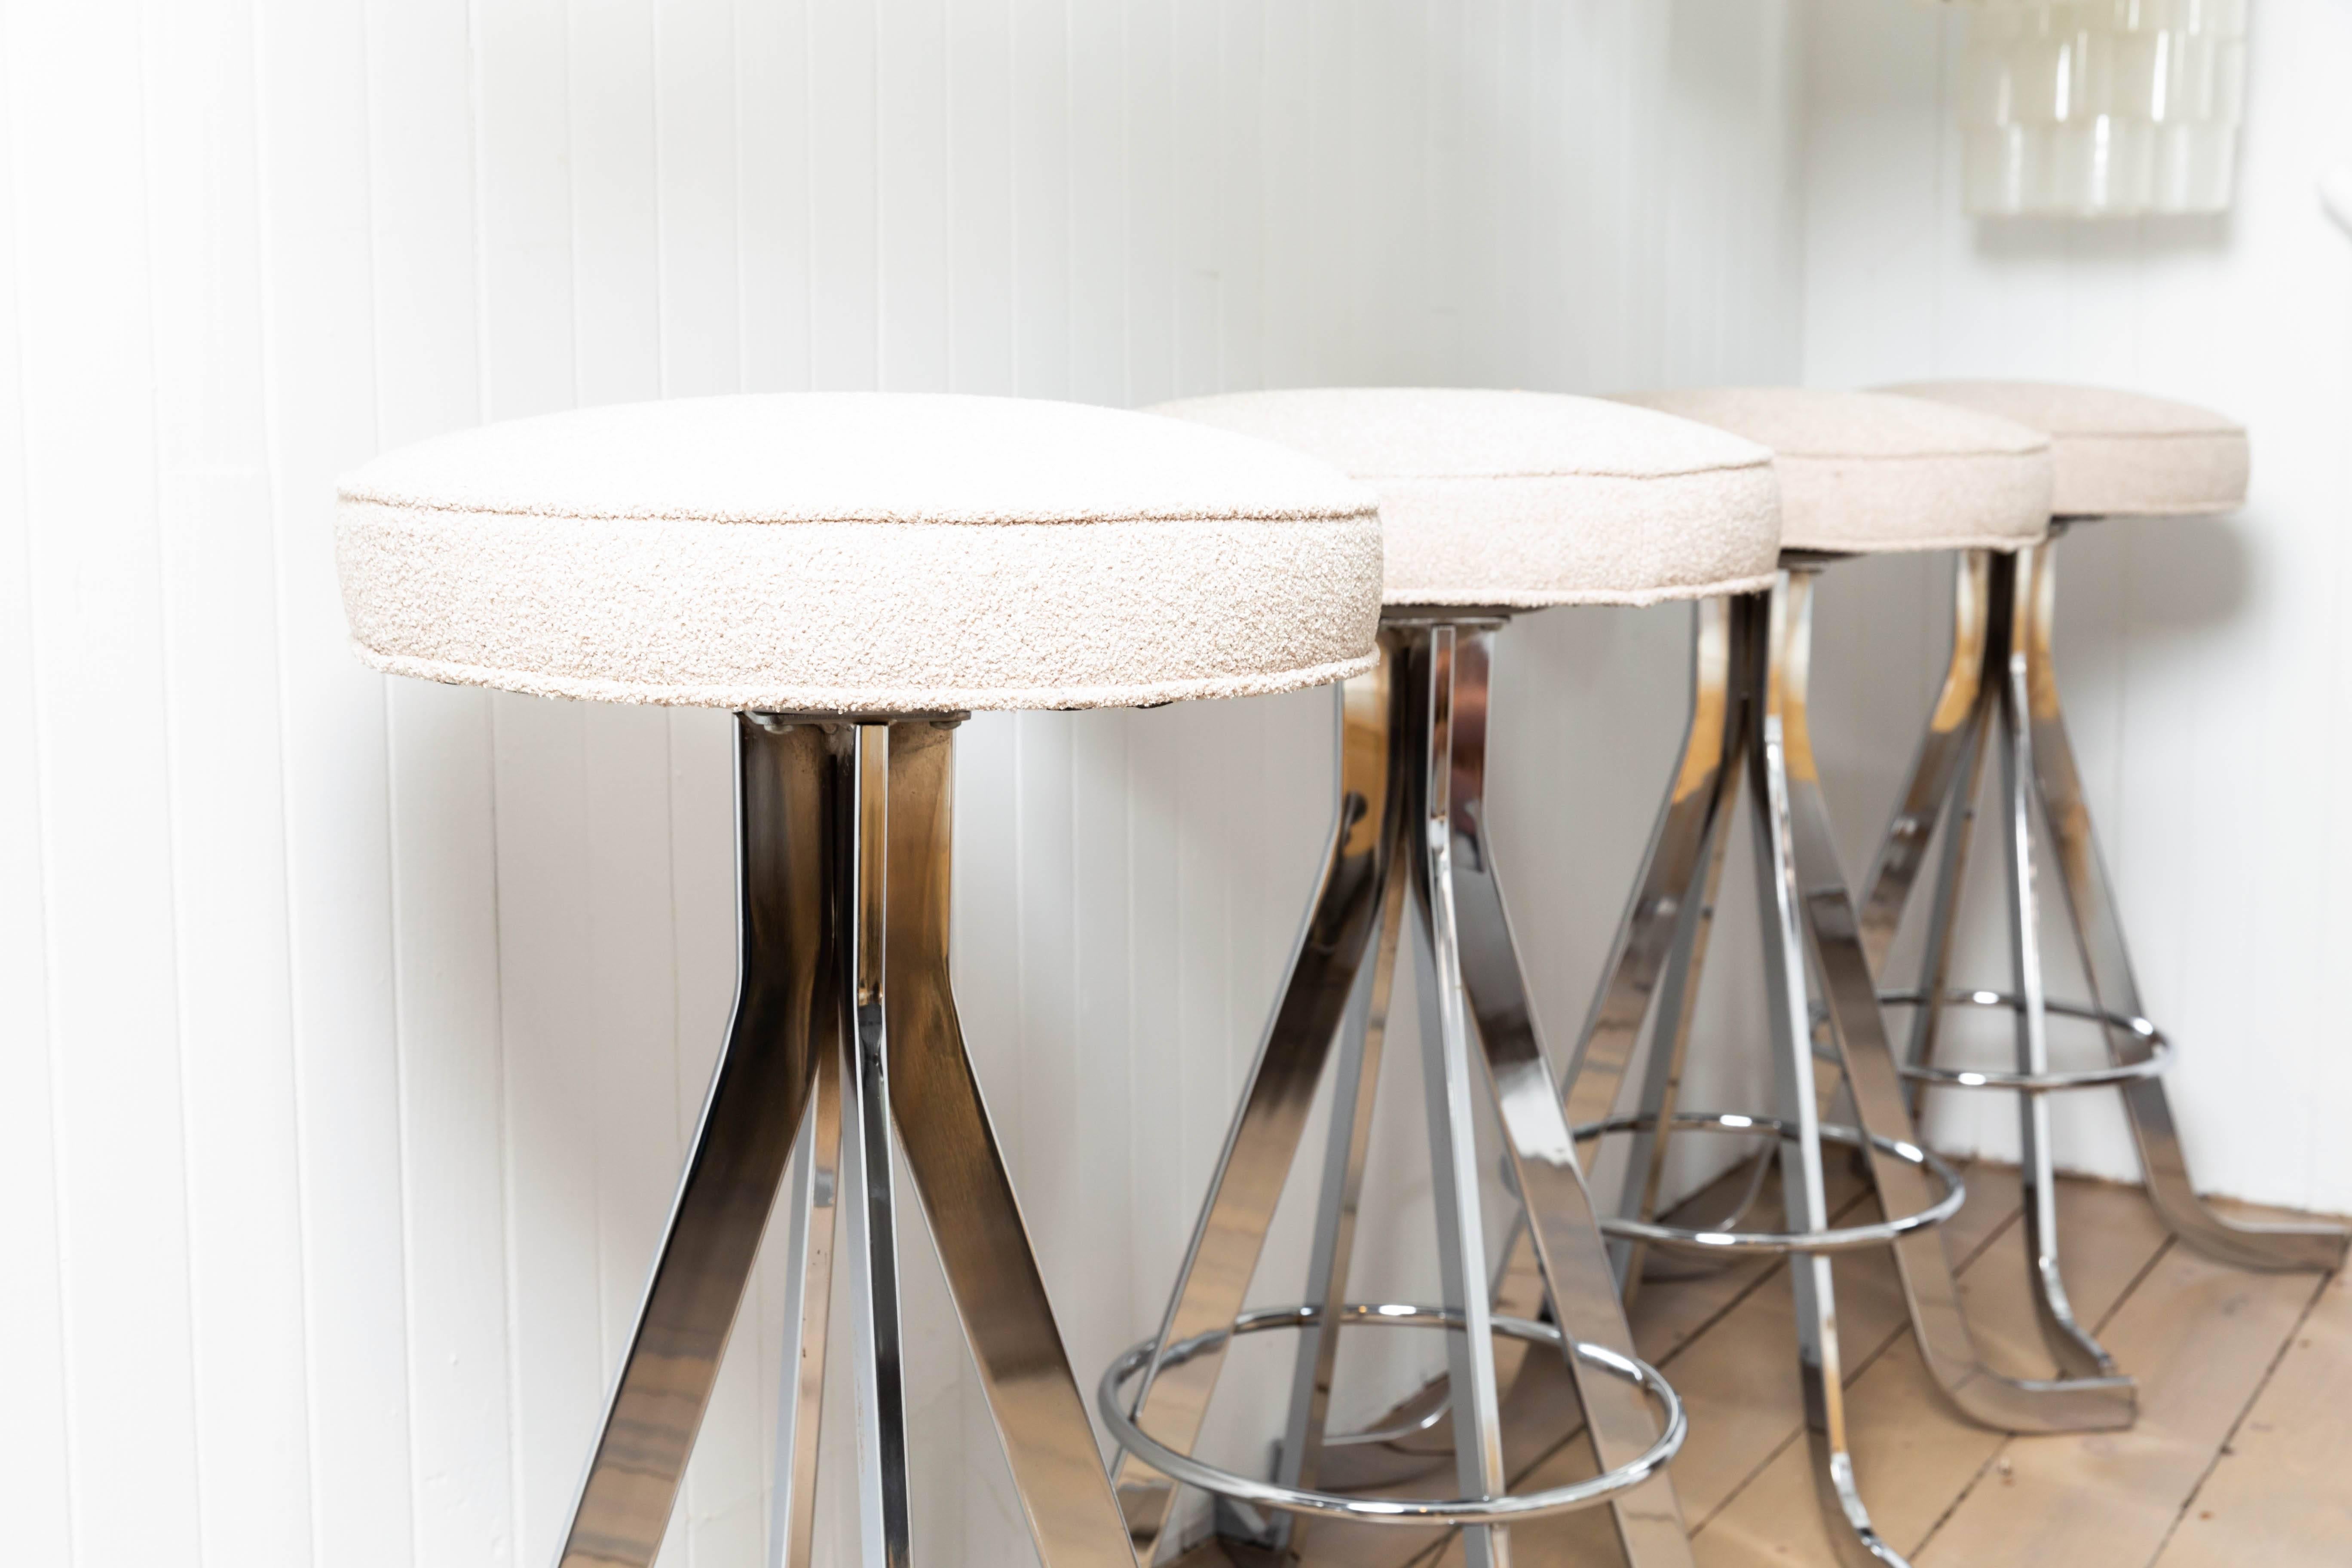 American Set of Four Polished Nickel Stools with Upholstered Circular Seats